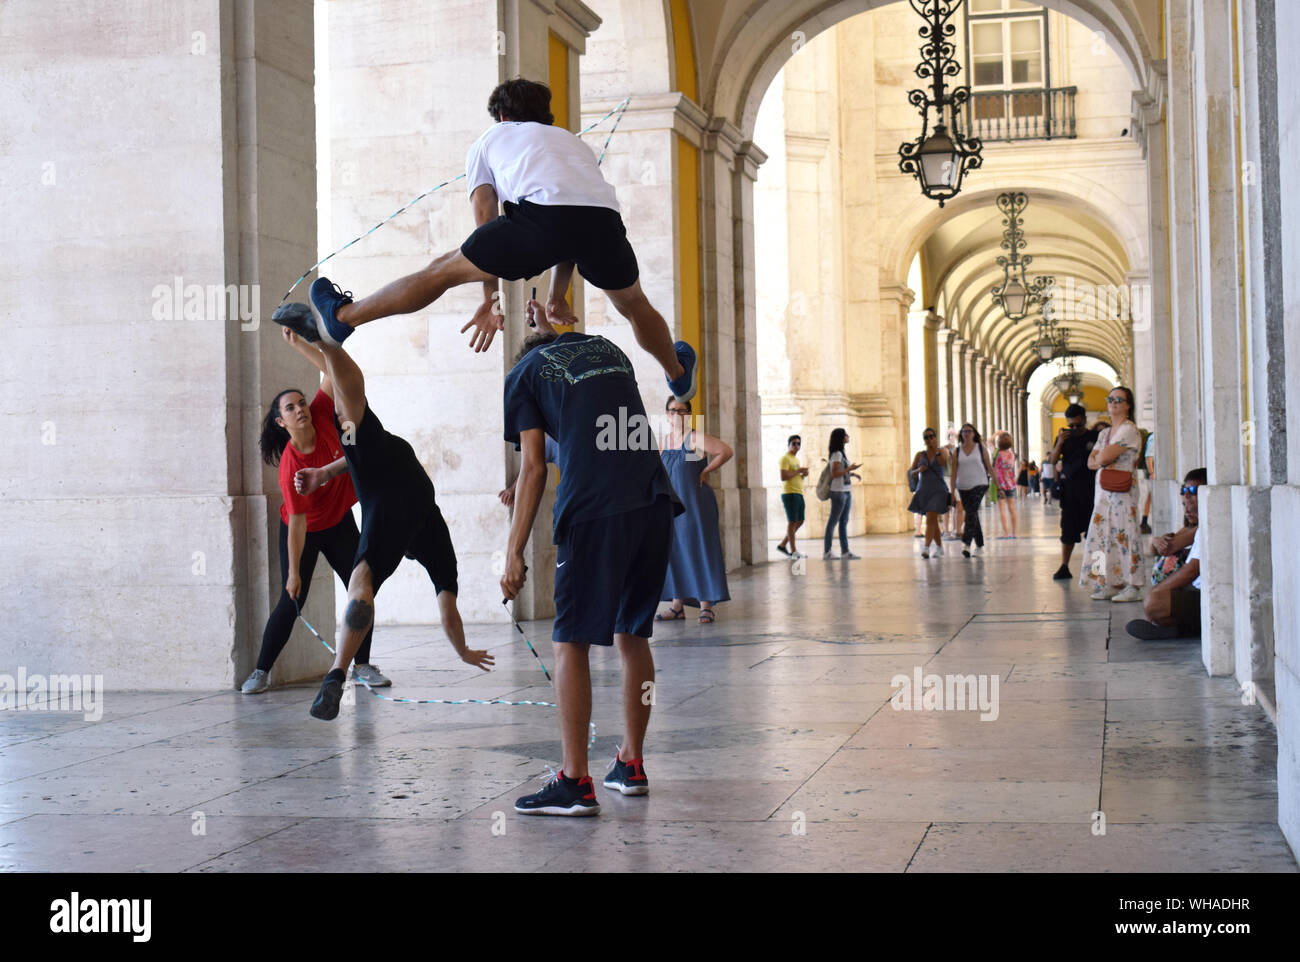 Four young people practising acrobatic double dutch with synchronised leap frogging and a cart wheel in Lisbon public walkways near Rua Augusta Arch Stock Photo